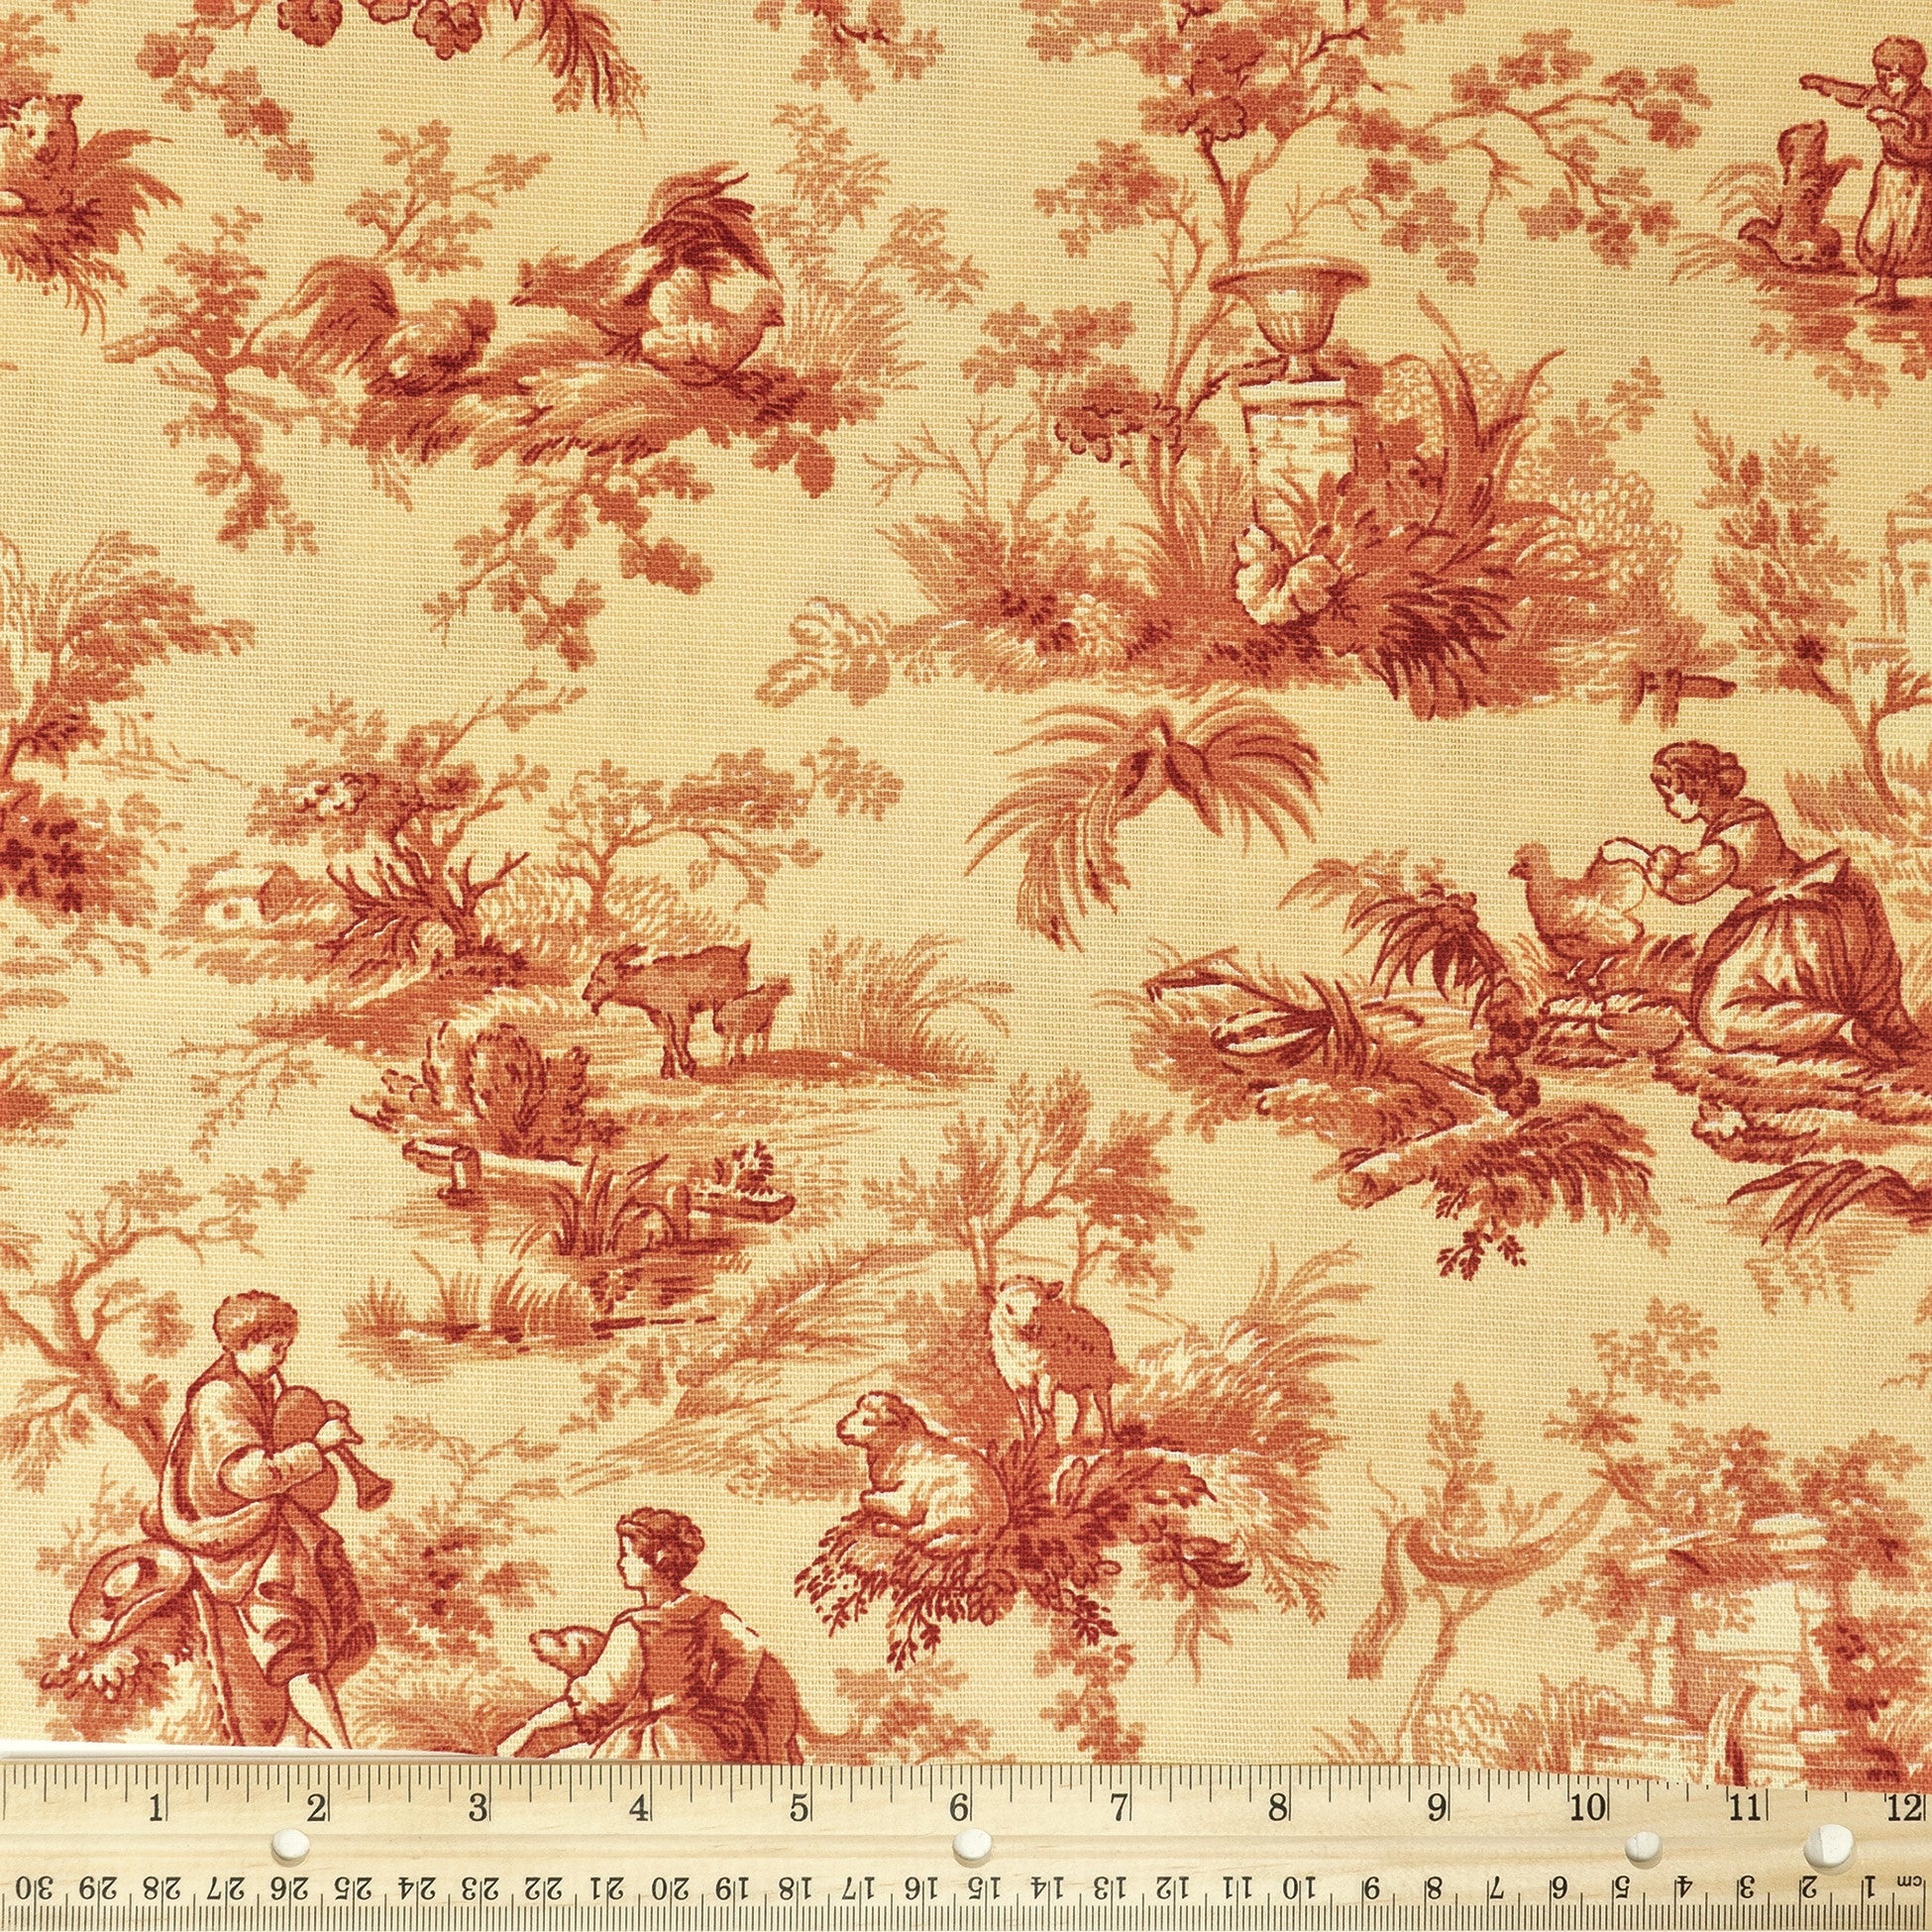 Waverly Inspirations 100% Cotton Duck 45" Width Toile Antique Color Sewing Fabric by the Yard